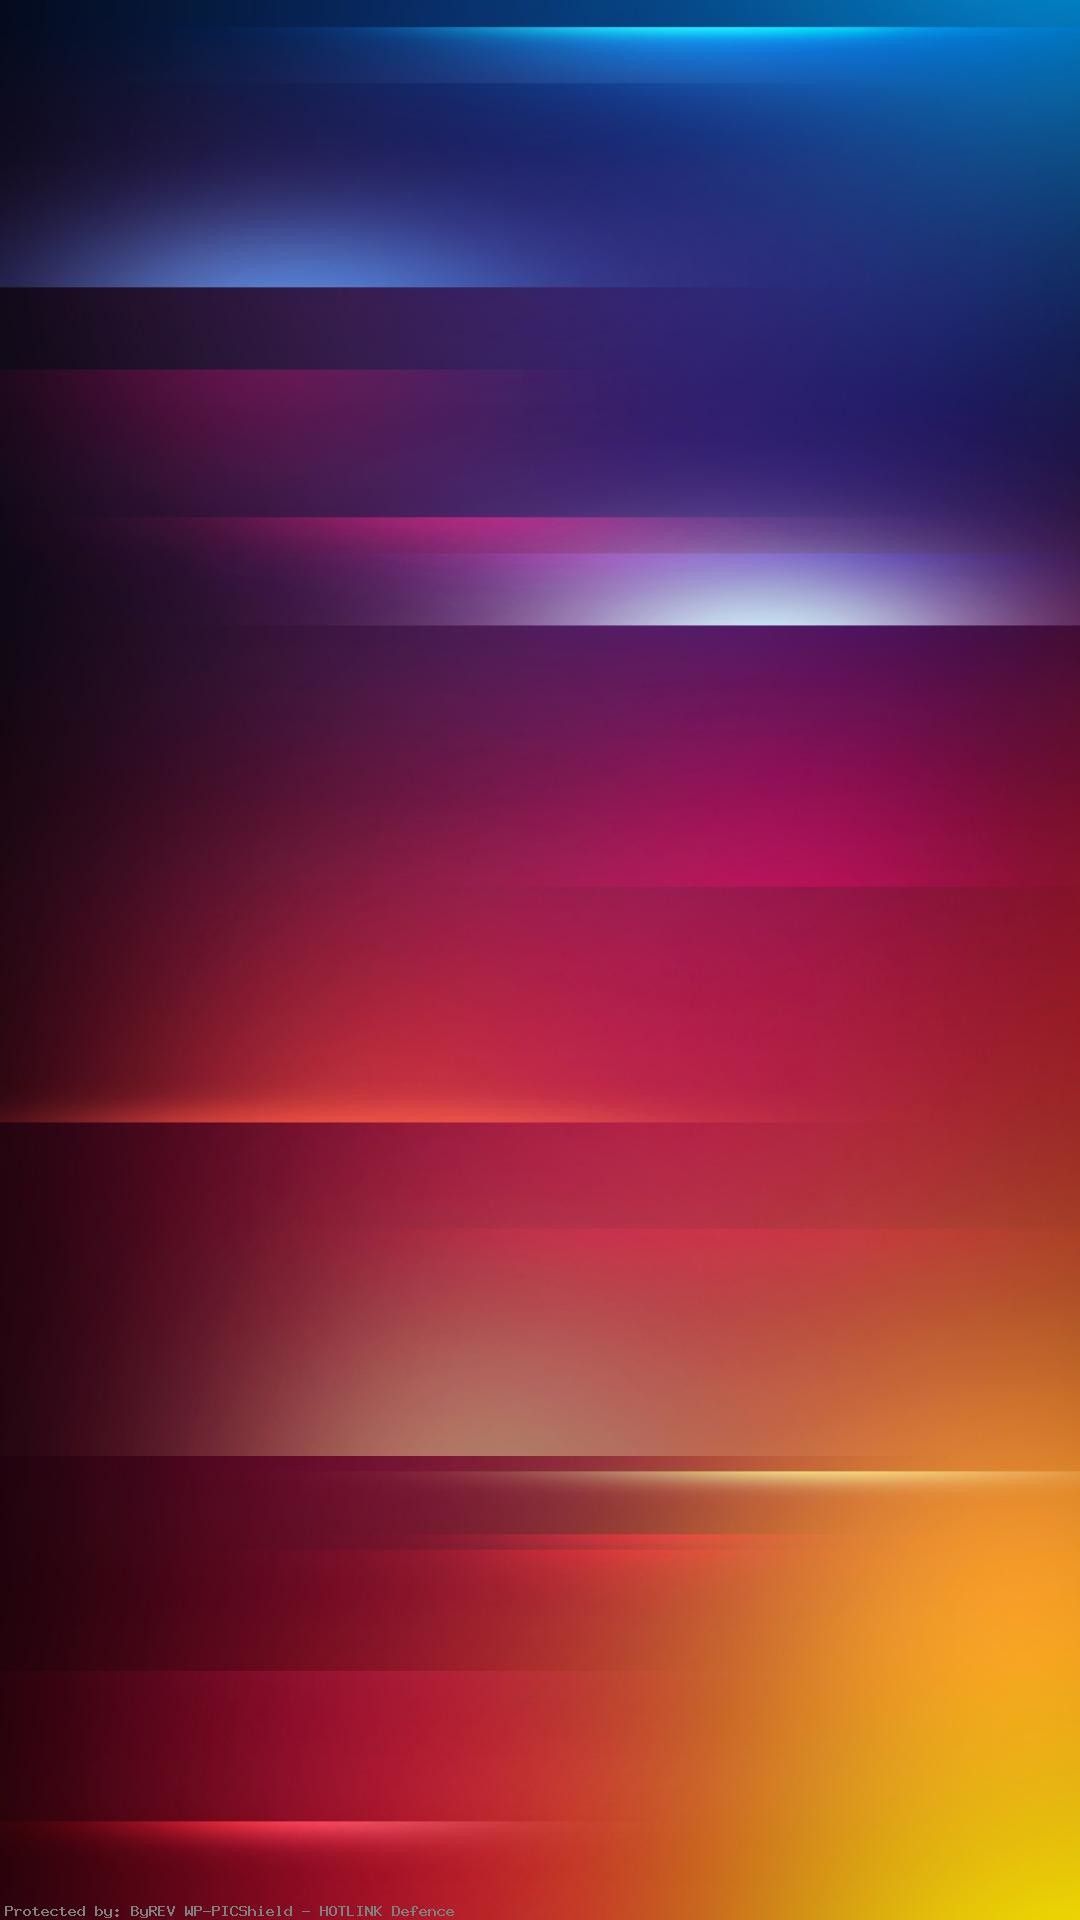 Solid Color Wallpaper for iPhone